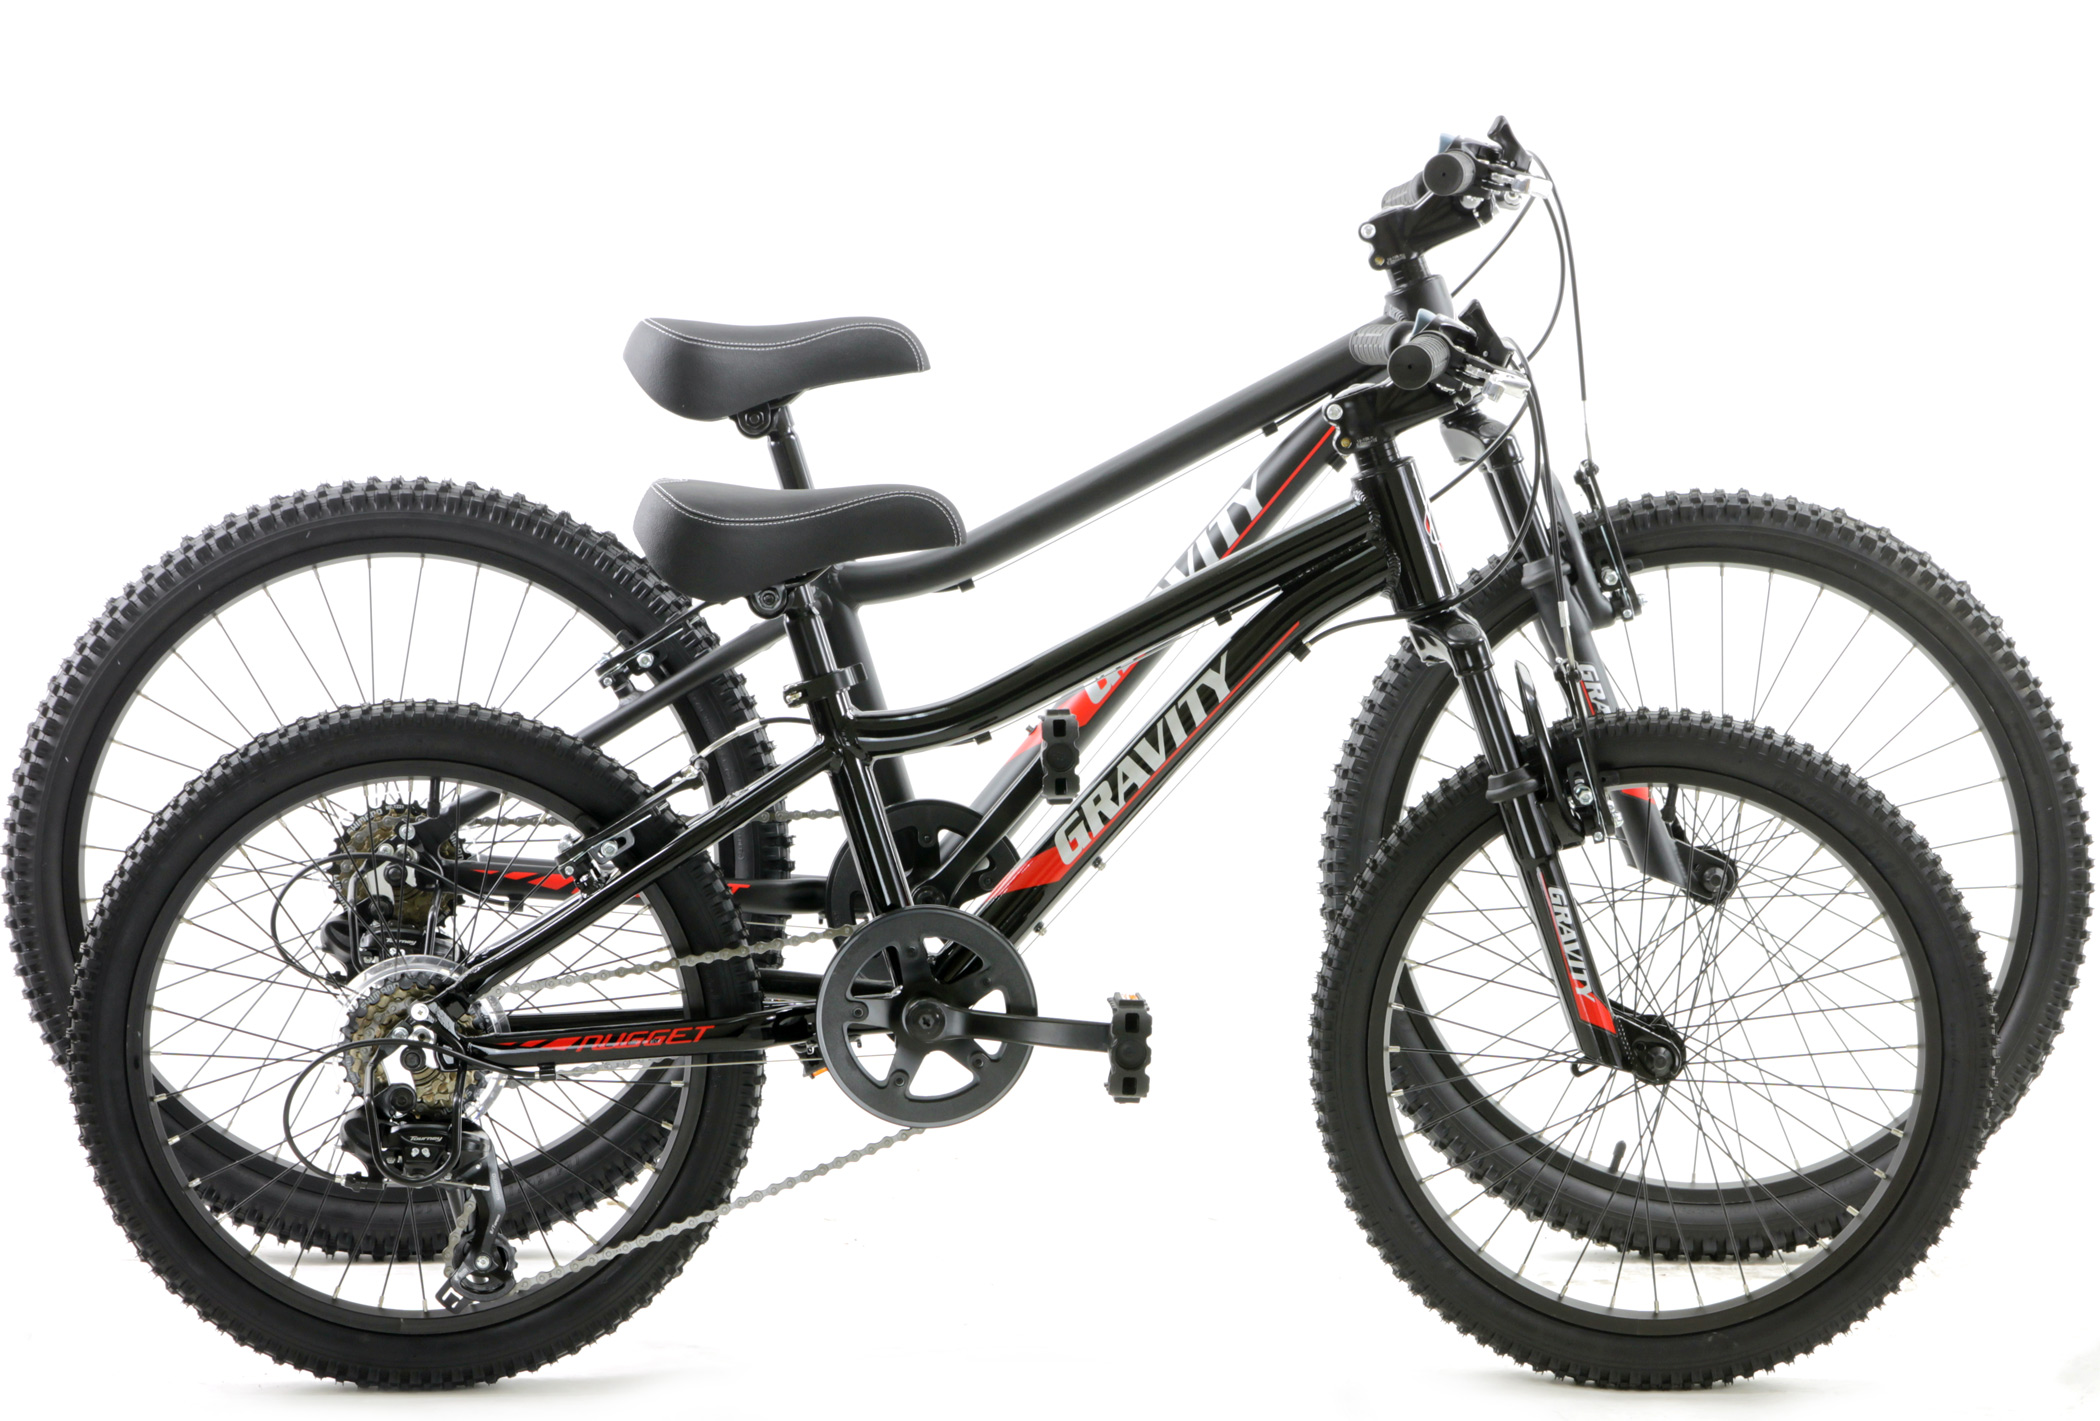 Save Up to 60% Off Bike Shop Quality Cruiser Bikes for Lil' Riders